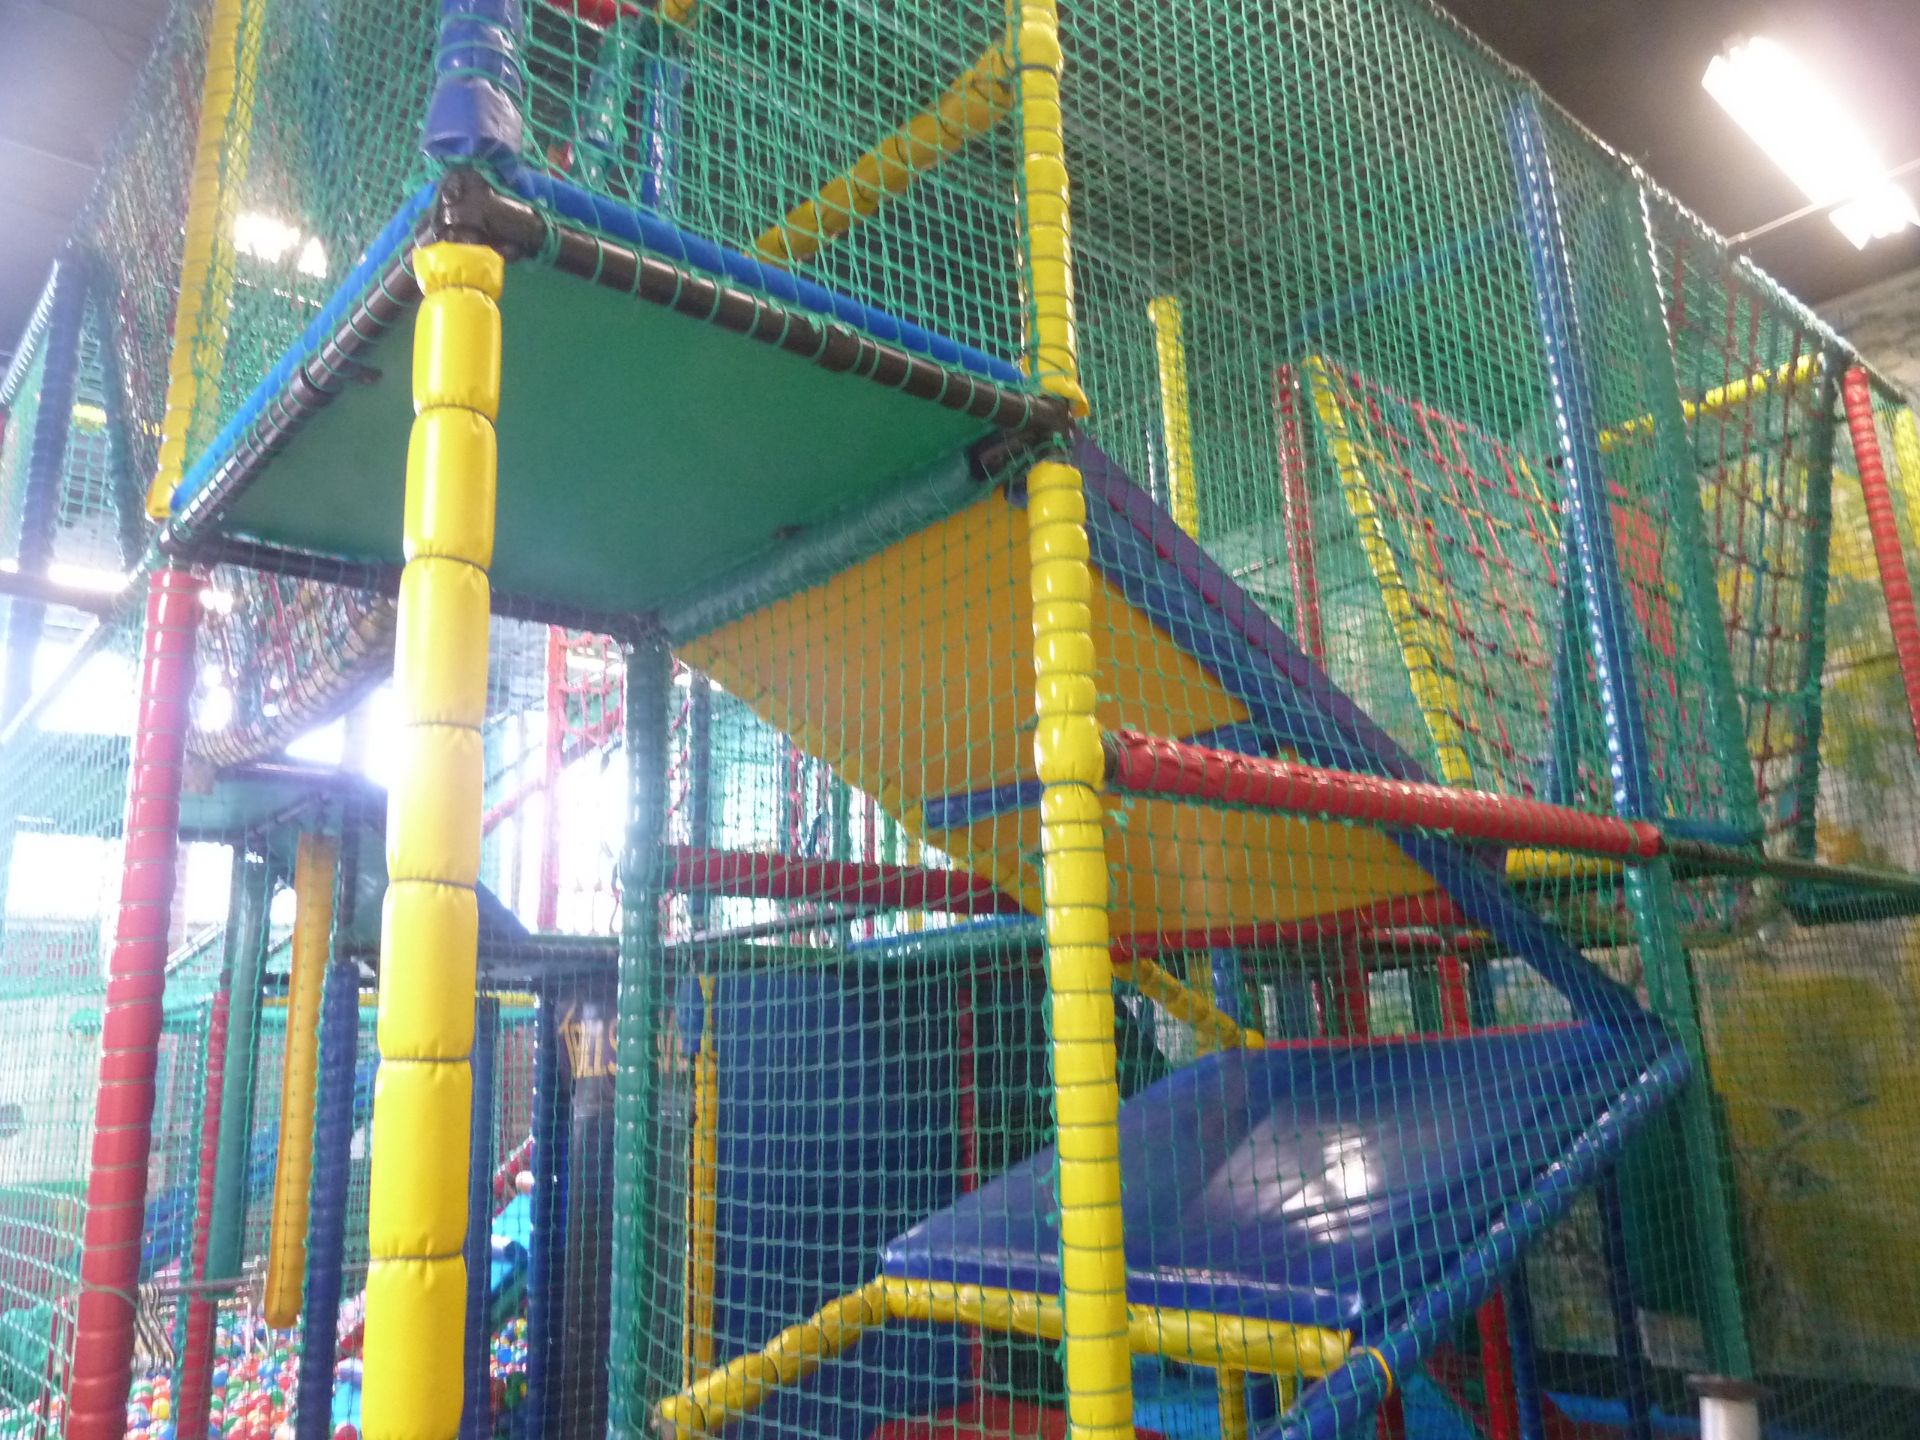 *Large soft play construction - 7.8m w x 5.8m d x 4.2m h. Constructed over two levels - Image 29 of 34